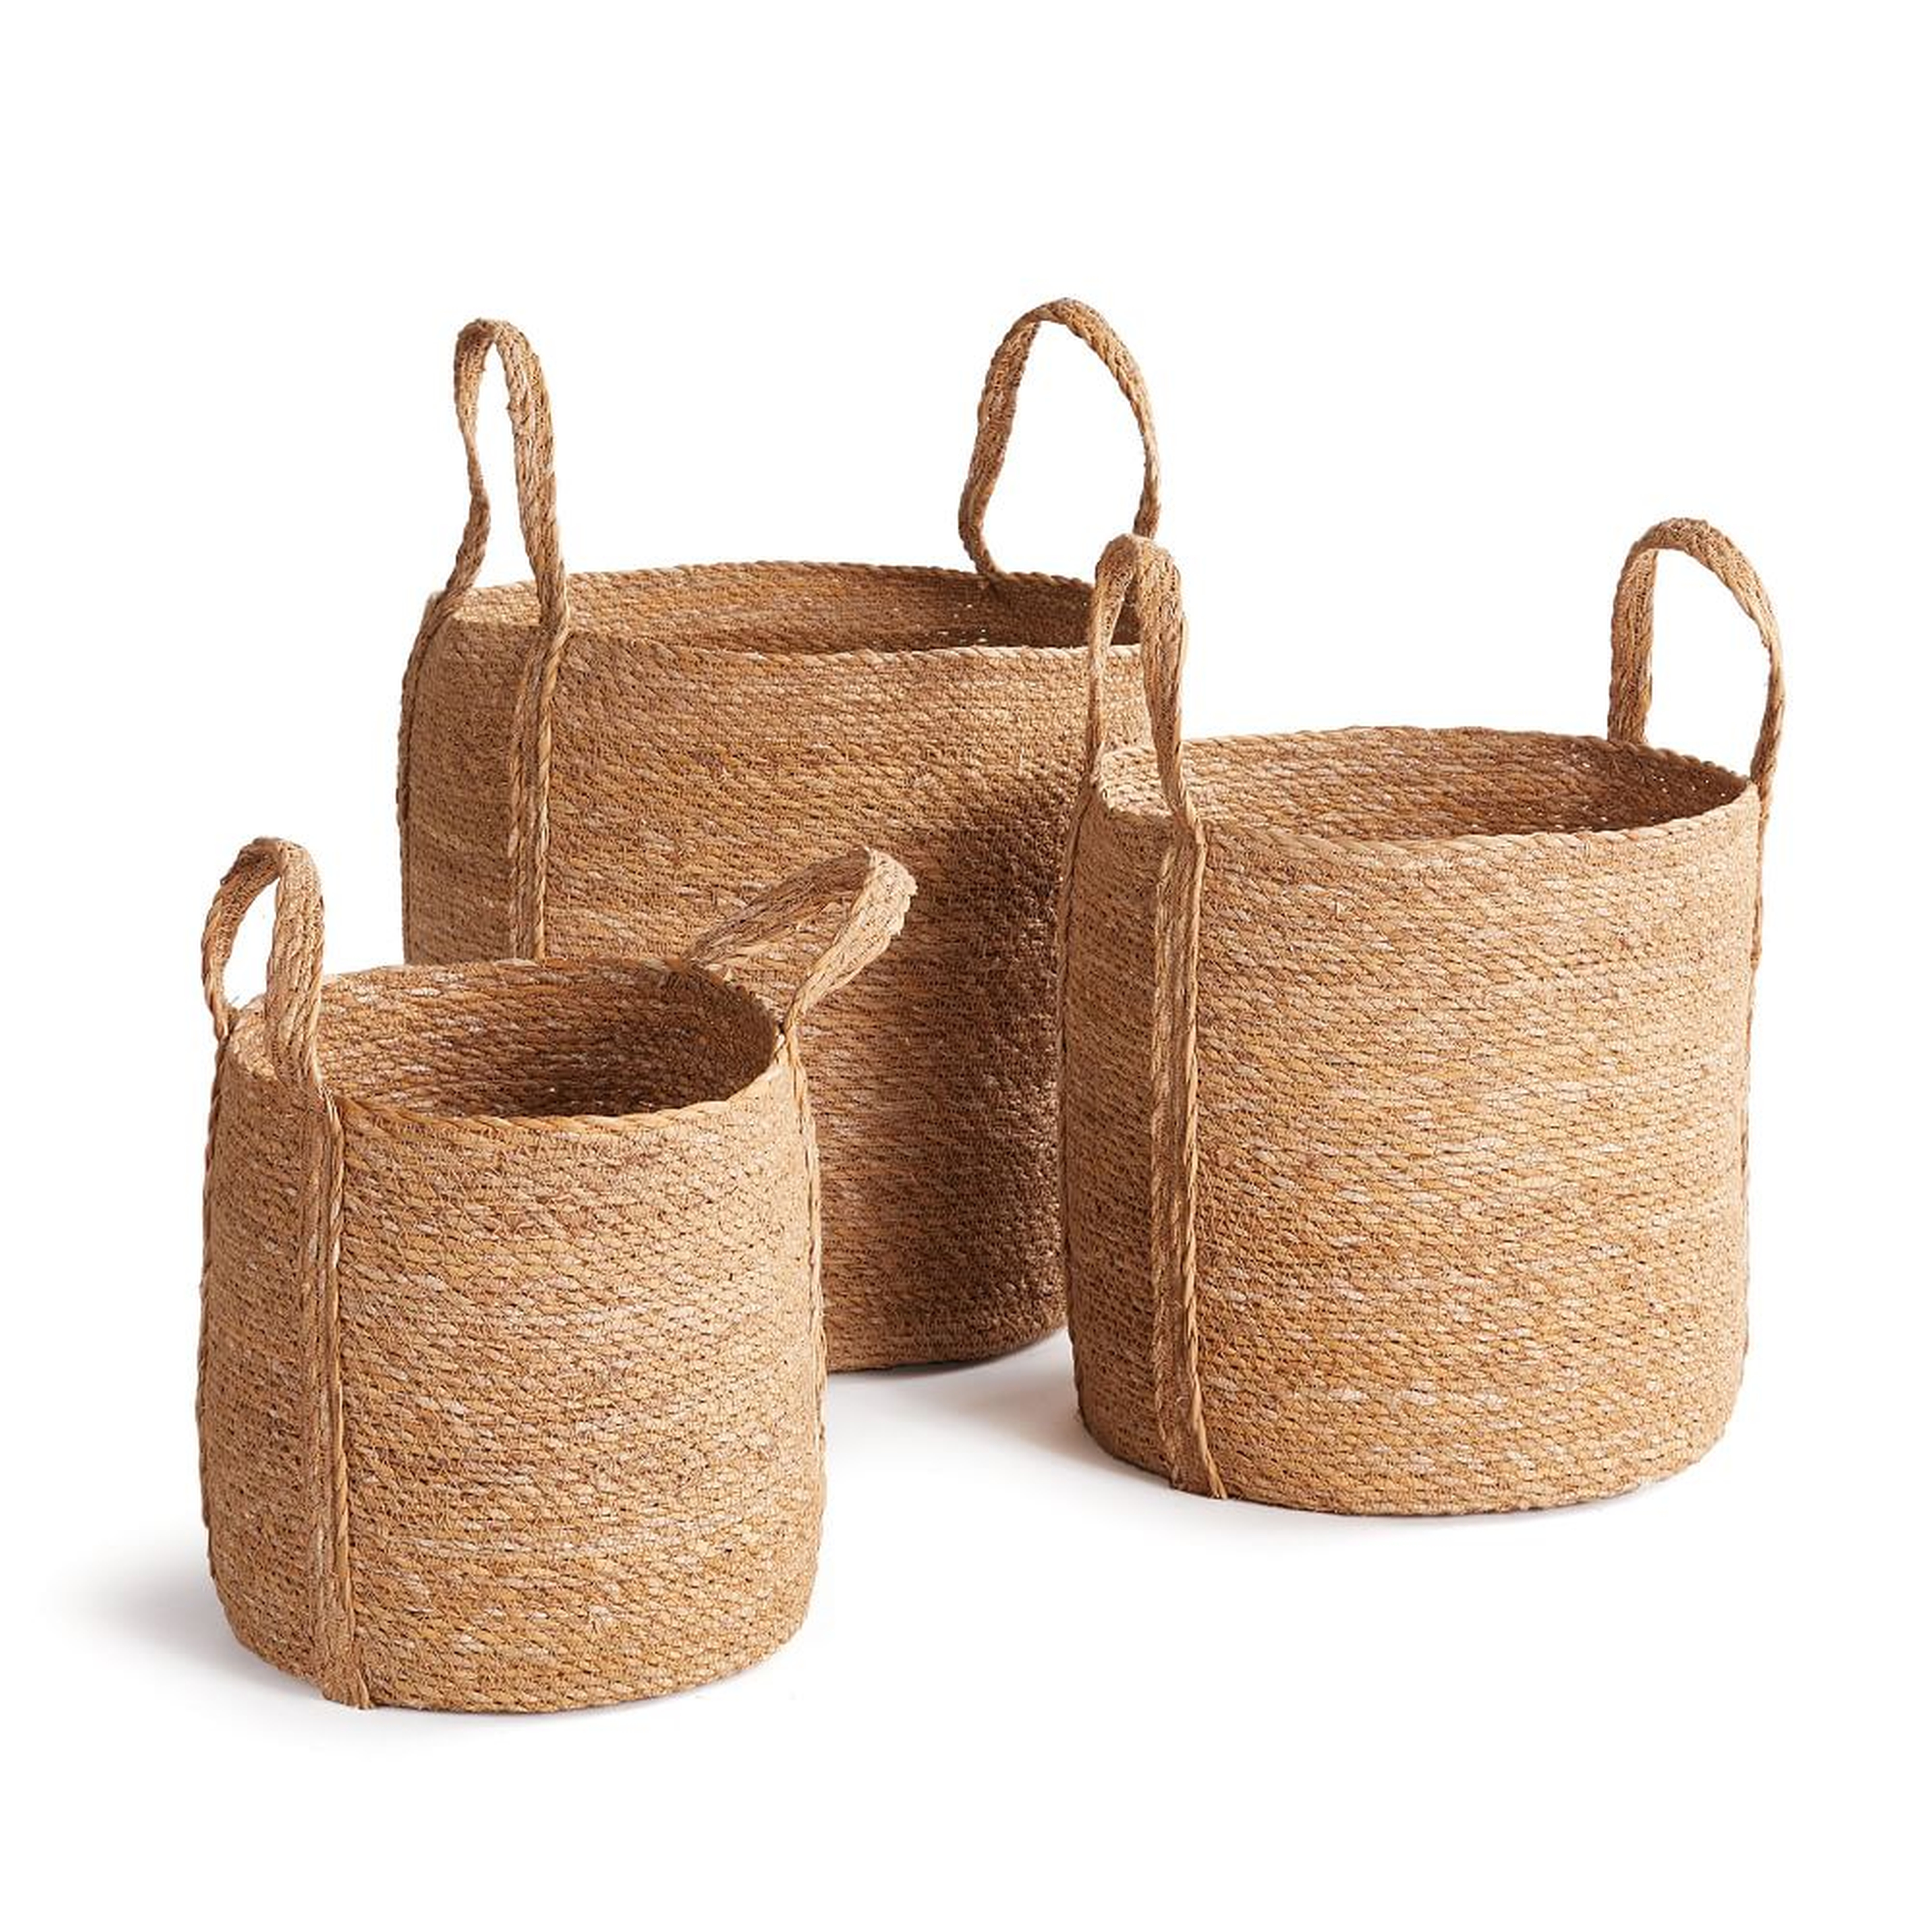 Seagrass Round Baskets with Long Handles, Set of 3 - West Elm